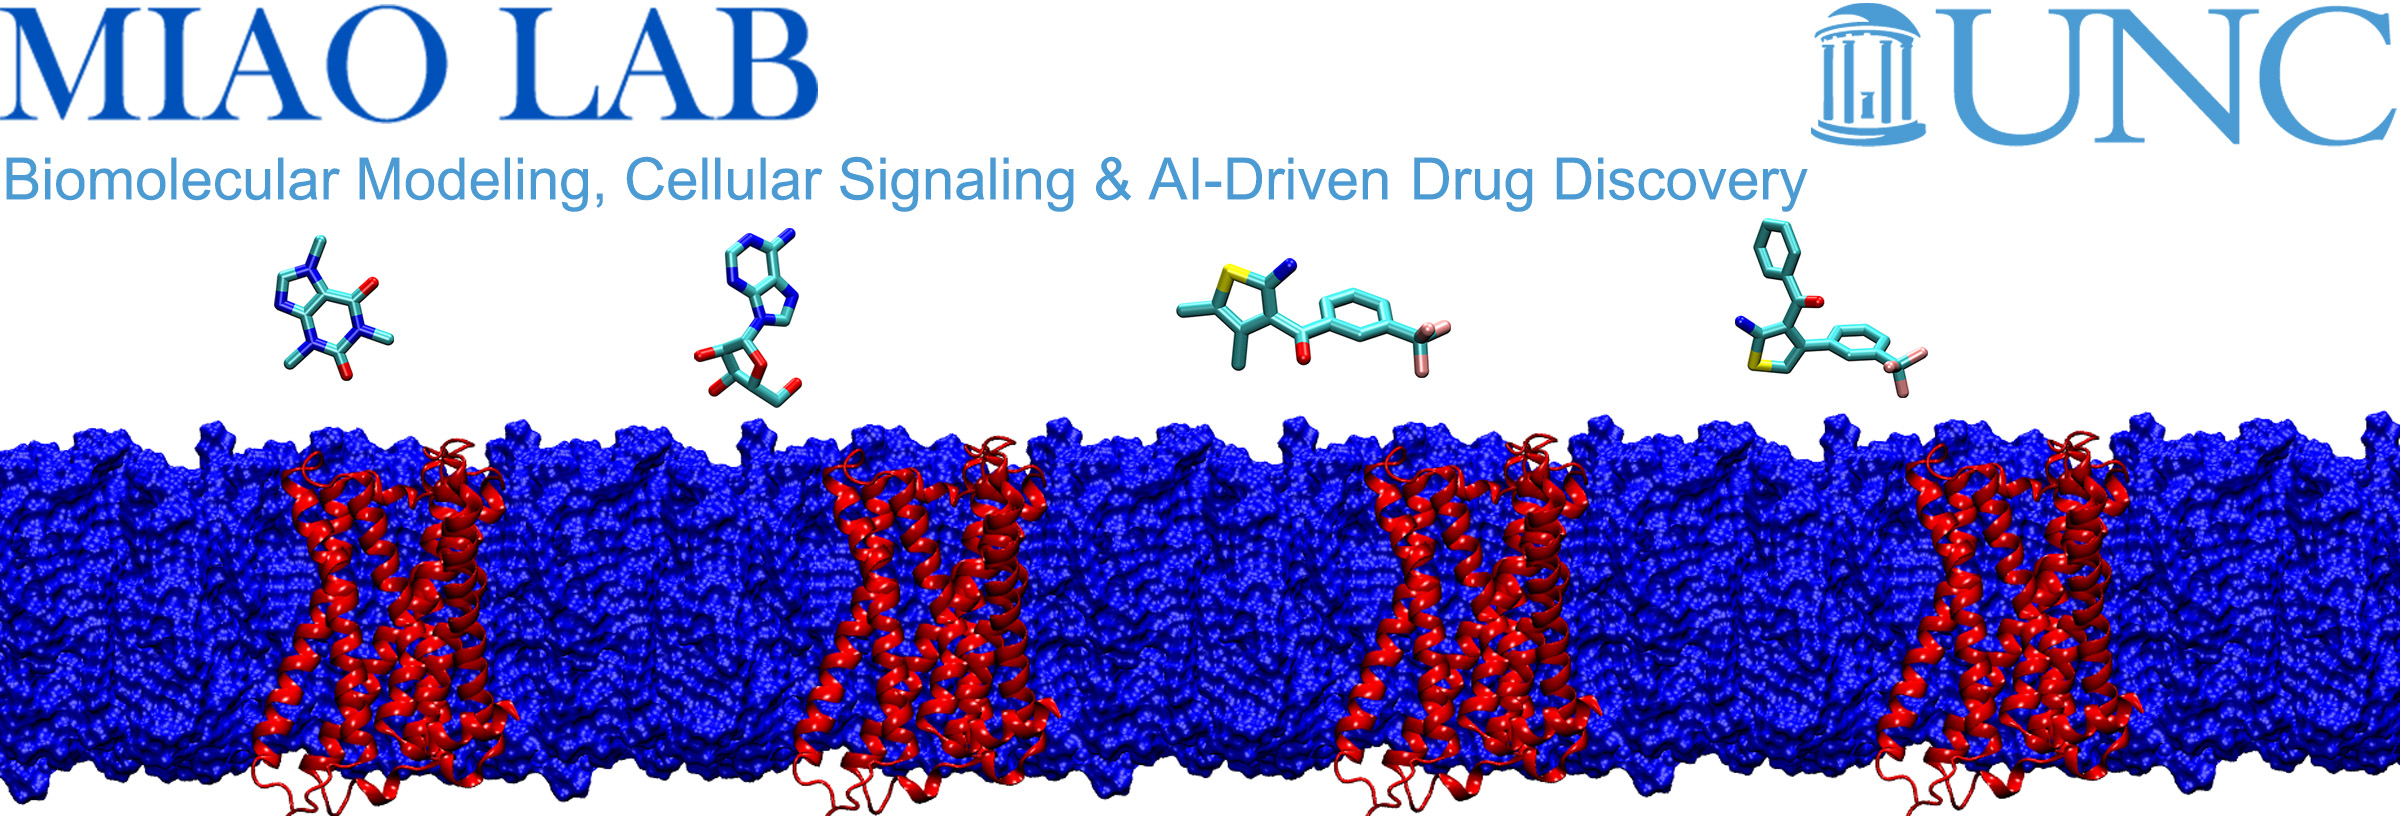 UNC MIao Lab: Biomolecular Modeling, Cellular Signaling & AI-Driven Drug Discovery.